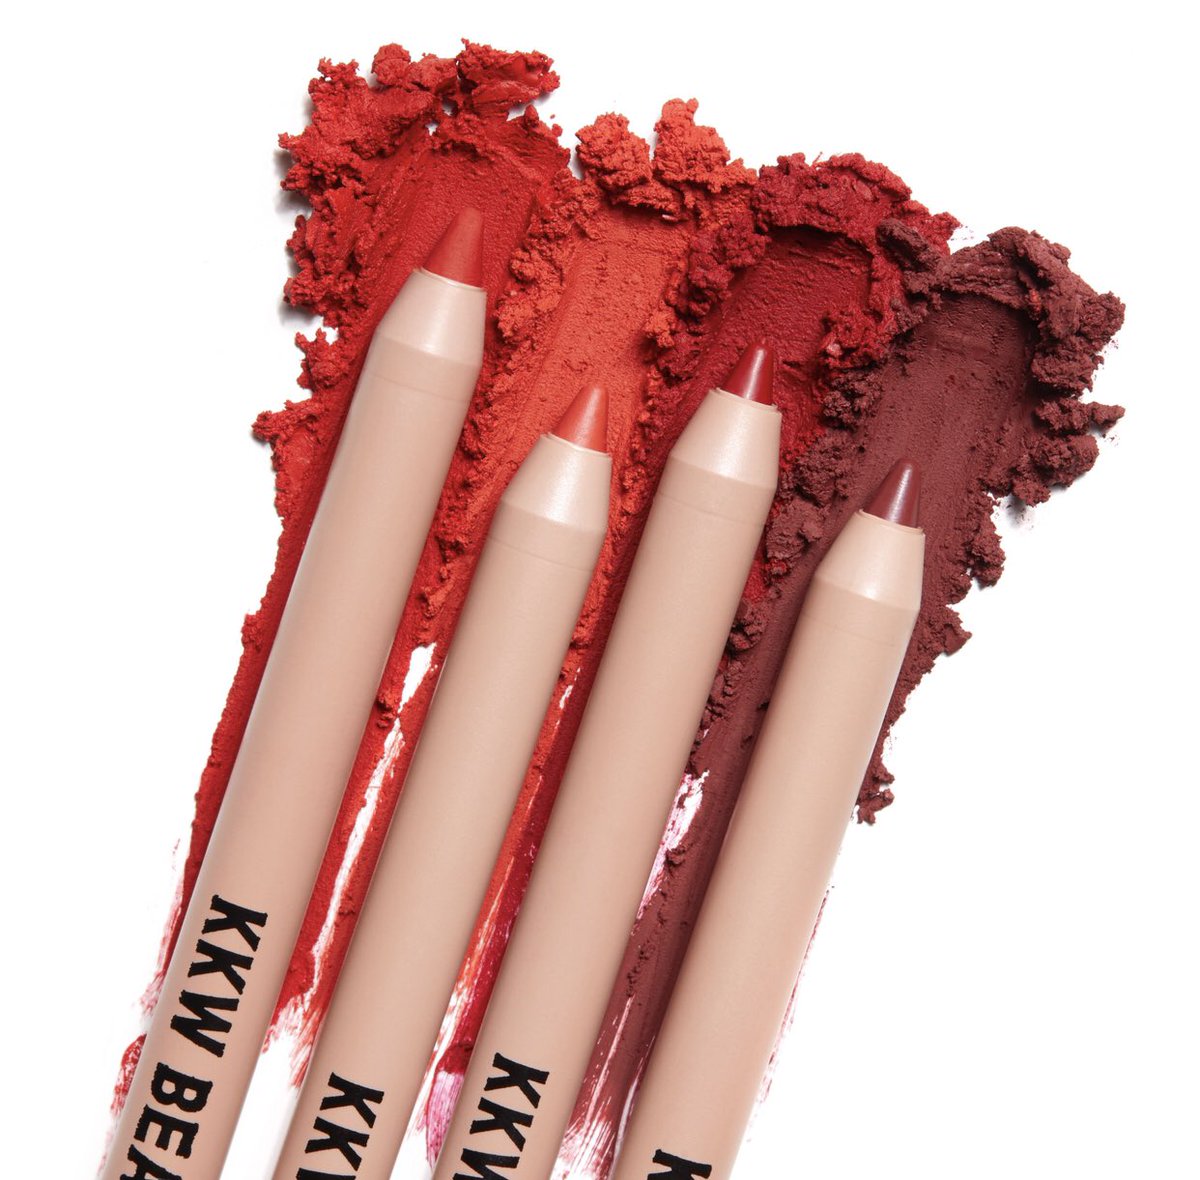 Brand New Red Crème Lip Liners. TODAY AT 12PM PST https://t.co/PoBZ3bhjs8 https://t.co/8tVaxf6JYG